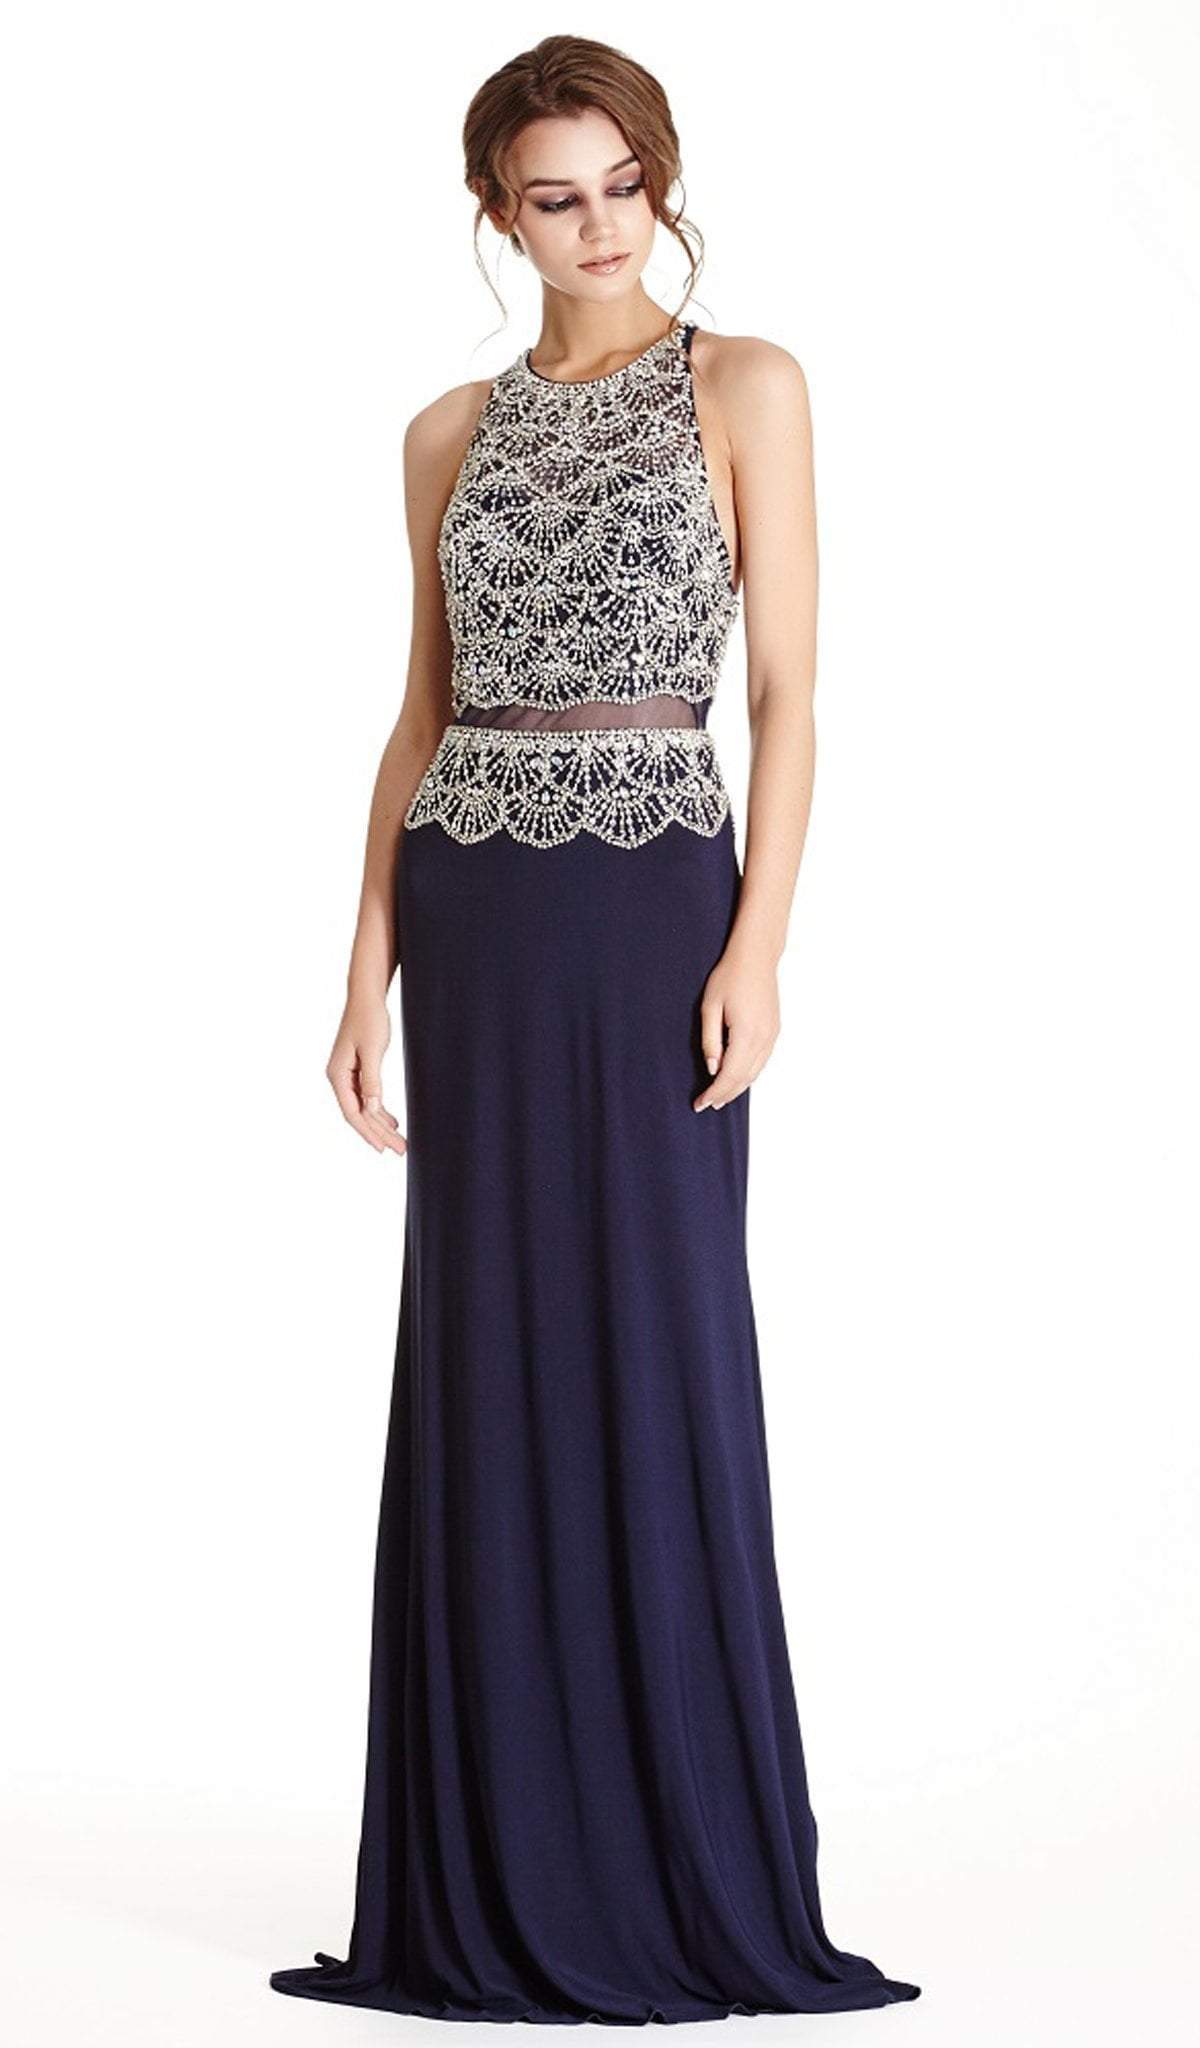 Image of Aspeed Design - Mock Two Piece Jeweled Fitted Prom Dress